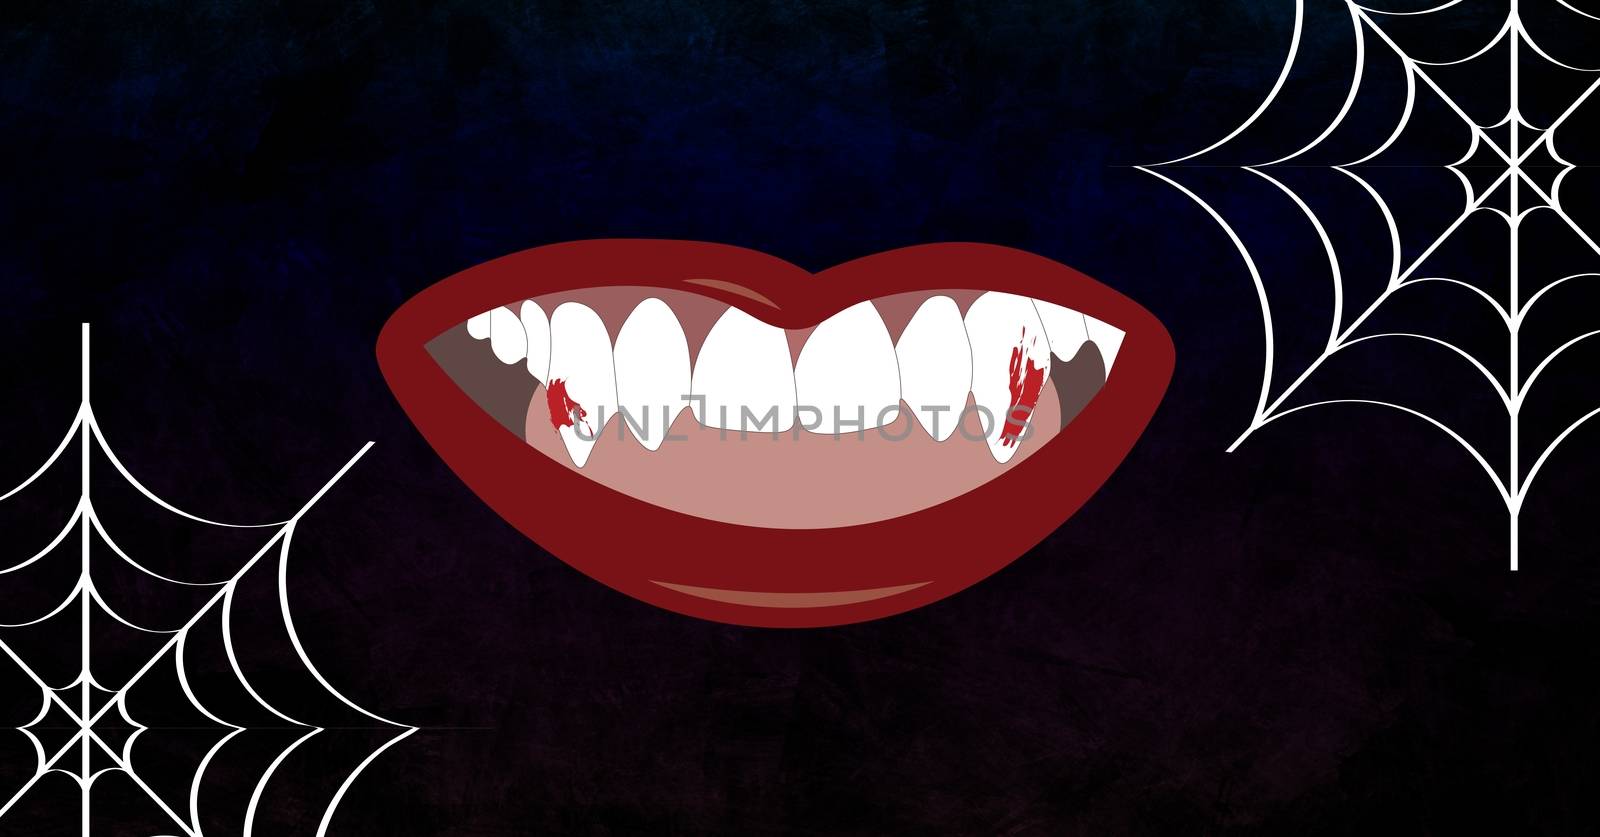 Lipstick with fangs and halloween cobwebs illustrations by Wavebreakmedia